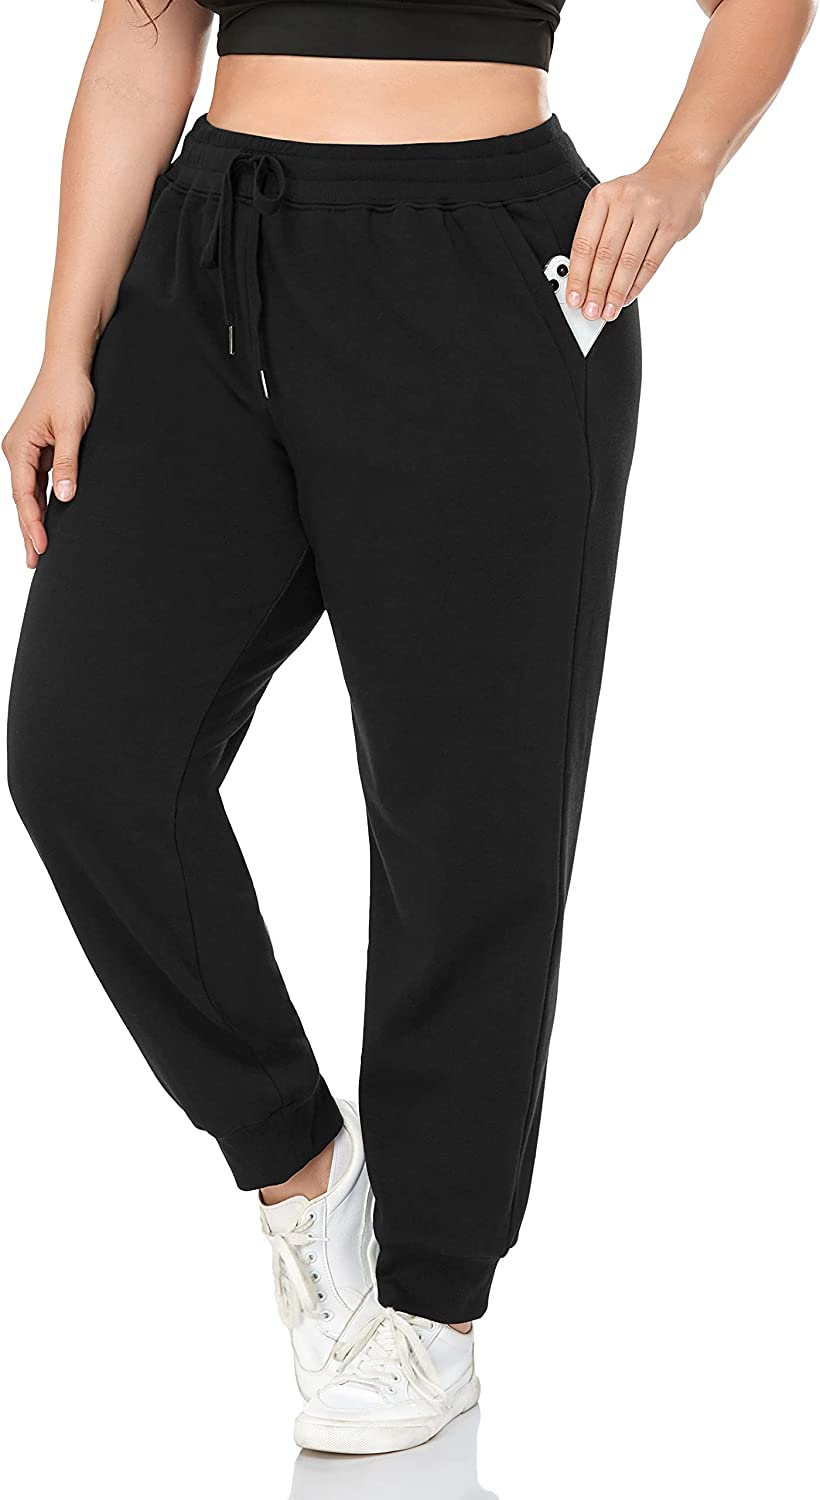 Women's Plus Size Fleece Lined Sweatpants Relaxed Fit Workout Athletic ...